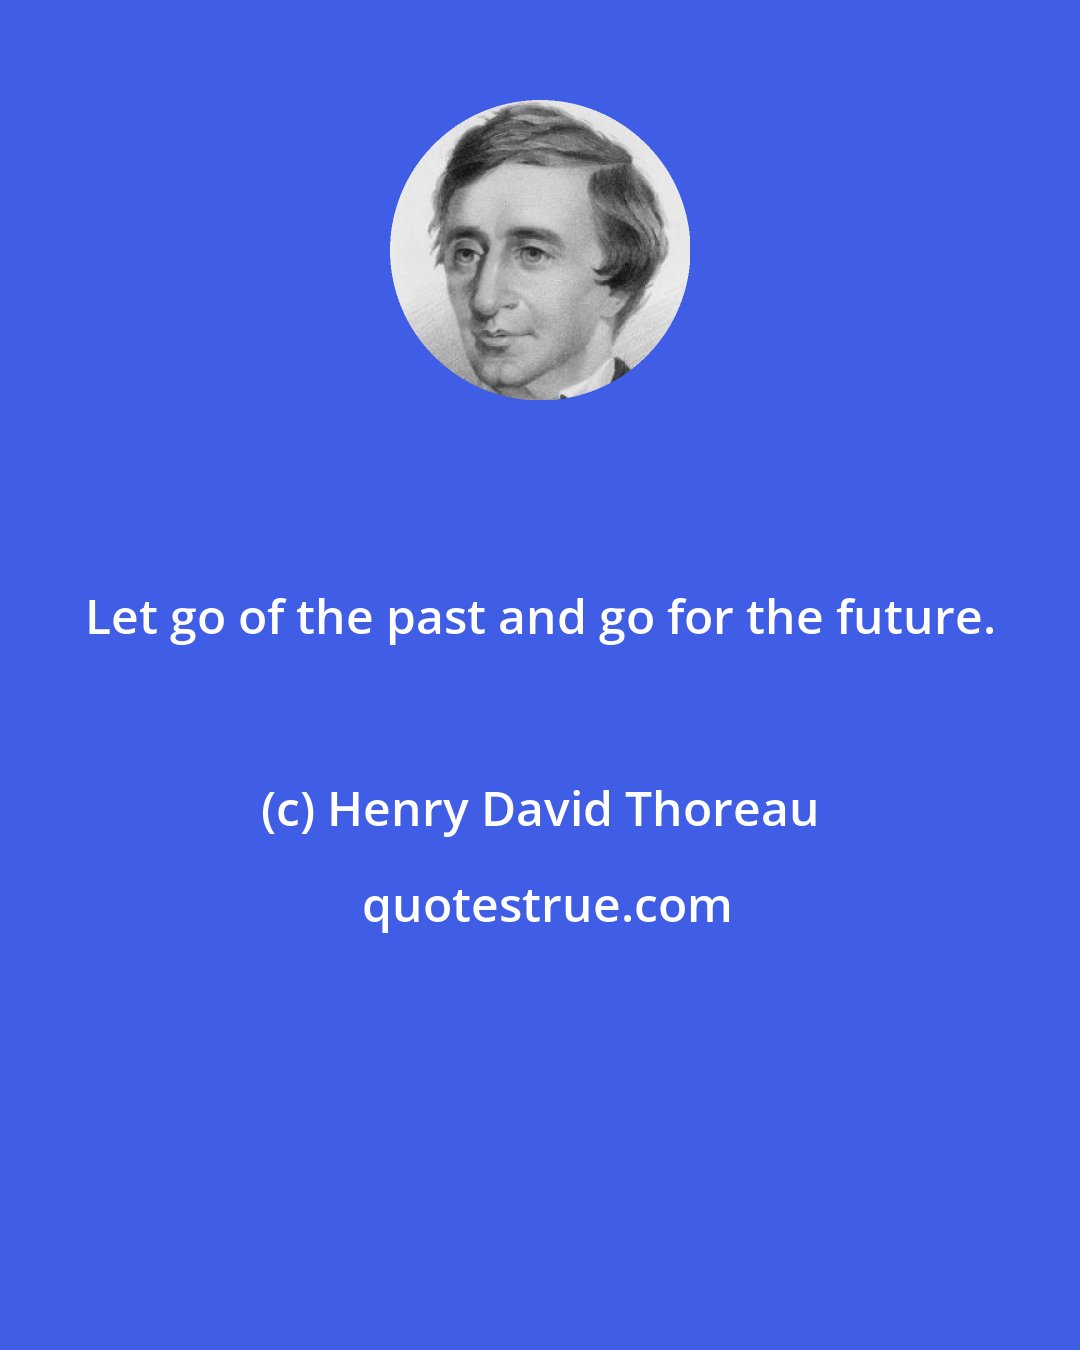 Henry David Thoreau: Let go of the past and go for the future.